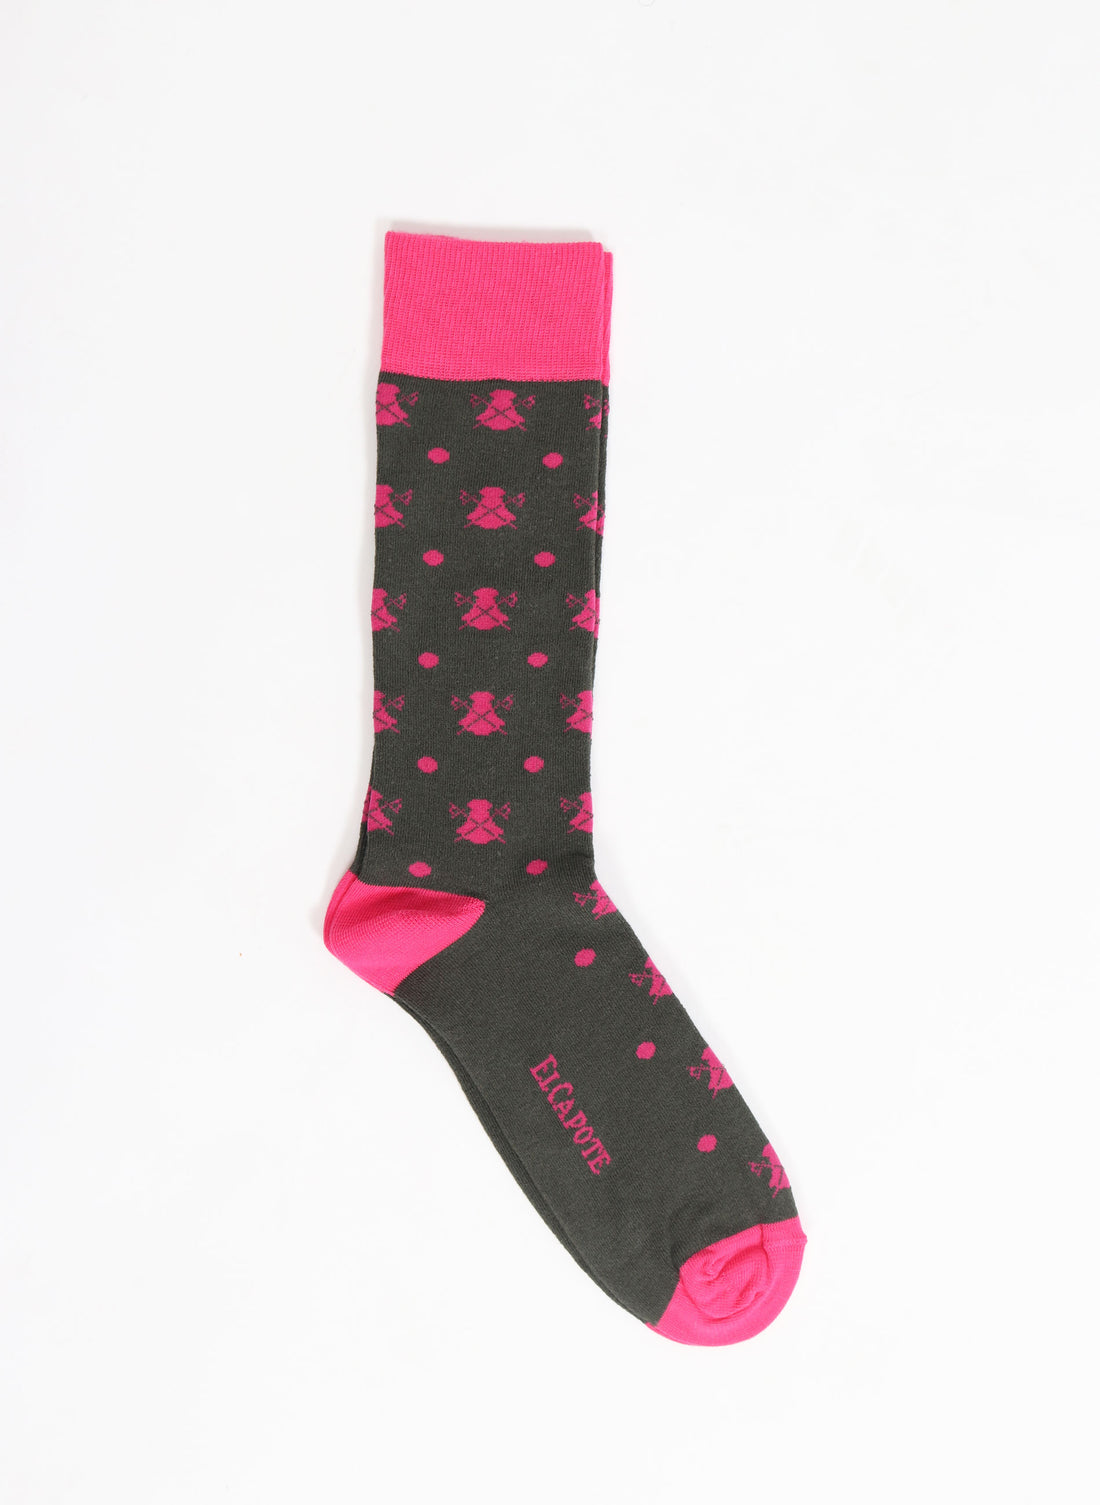 Kaki Green Sock with Capotes and Polka Dots in Pink